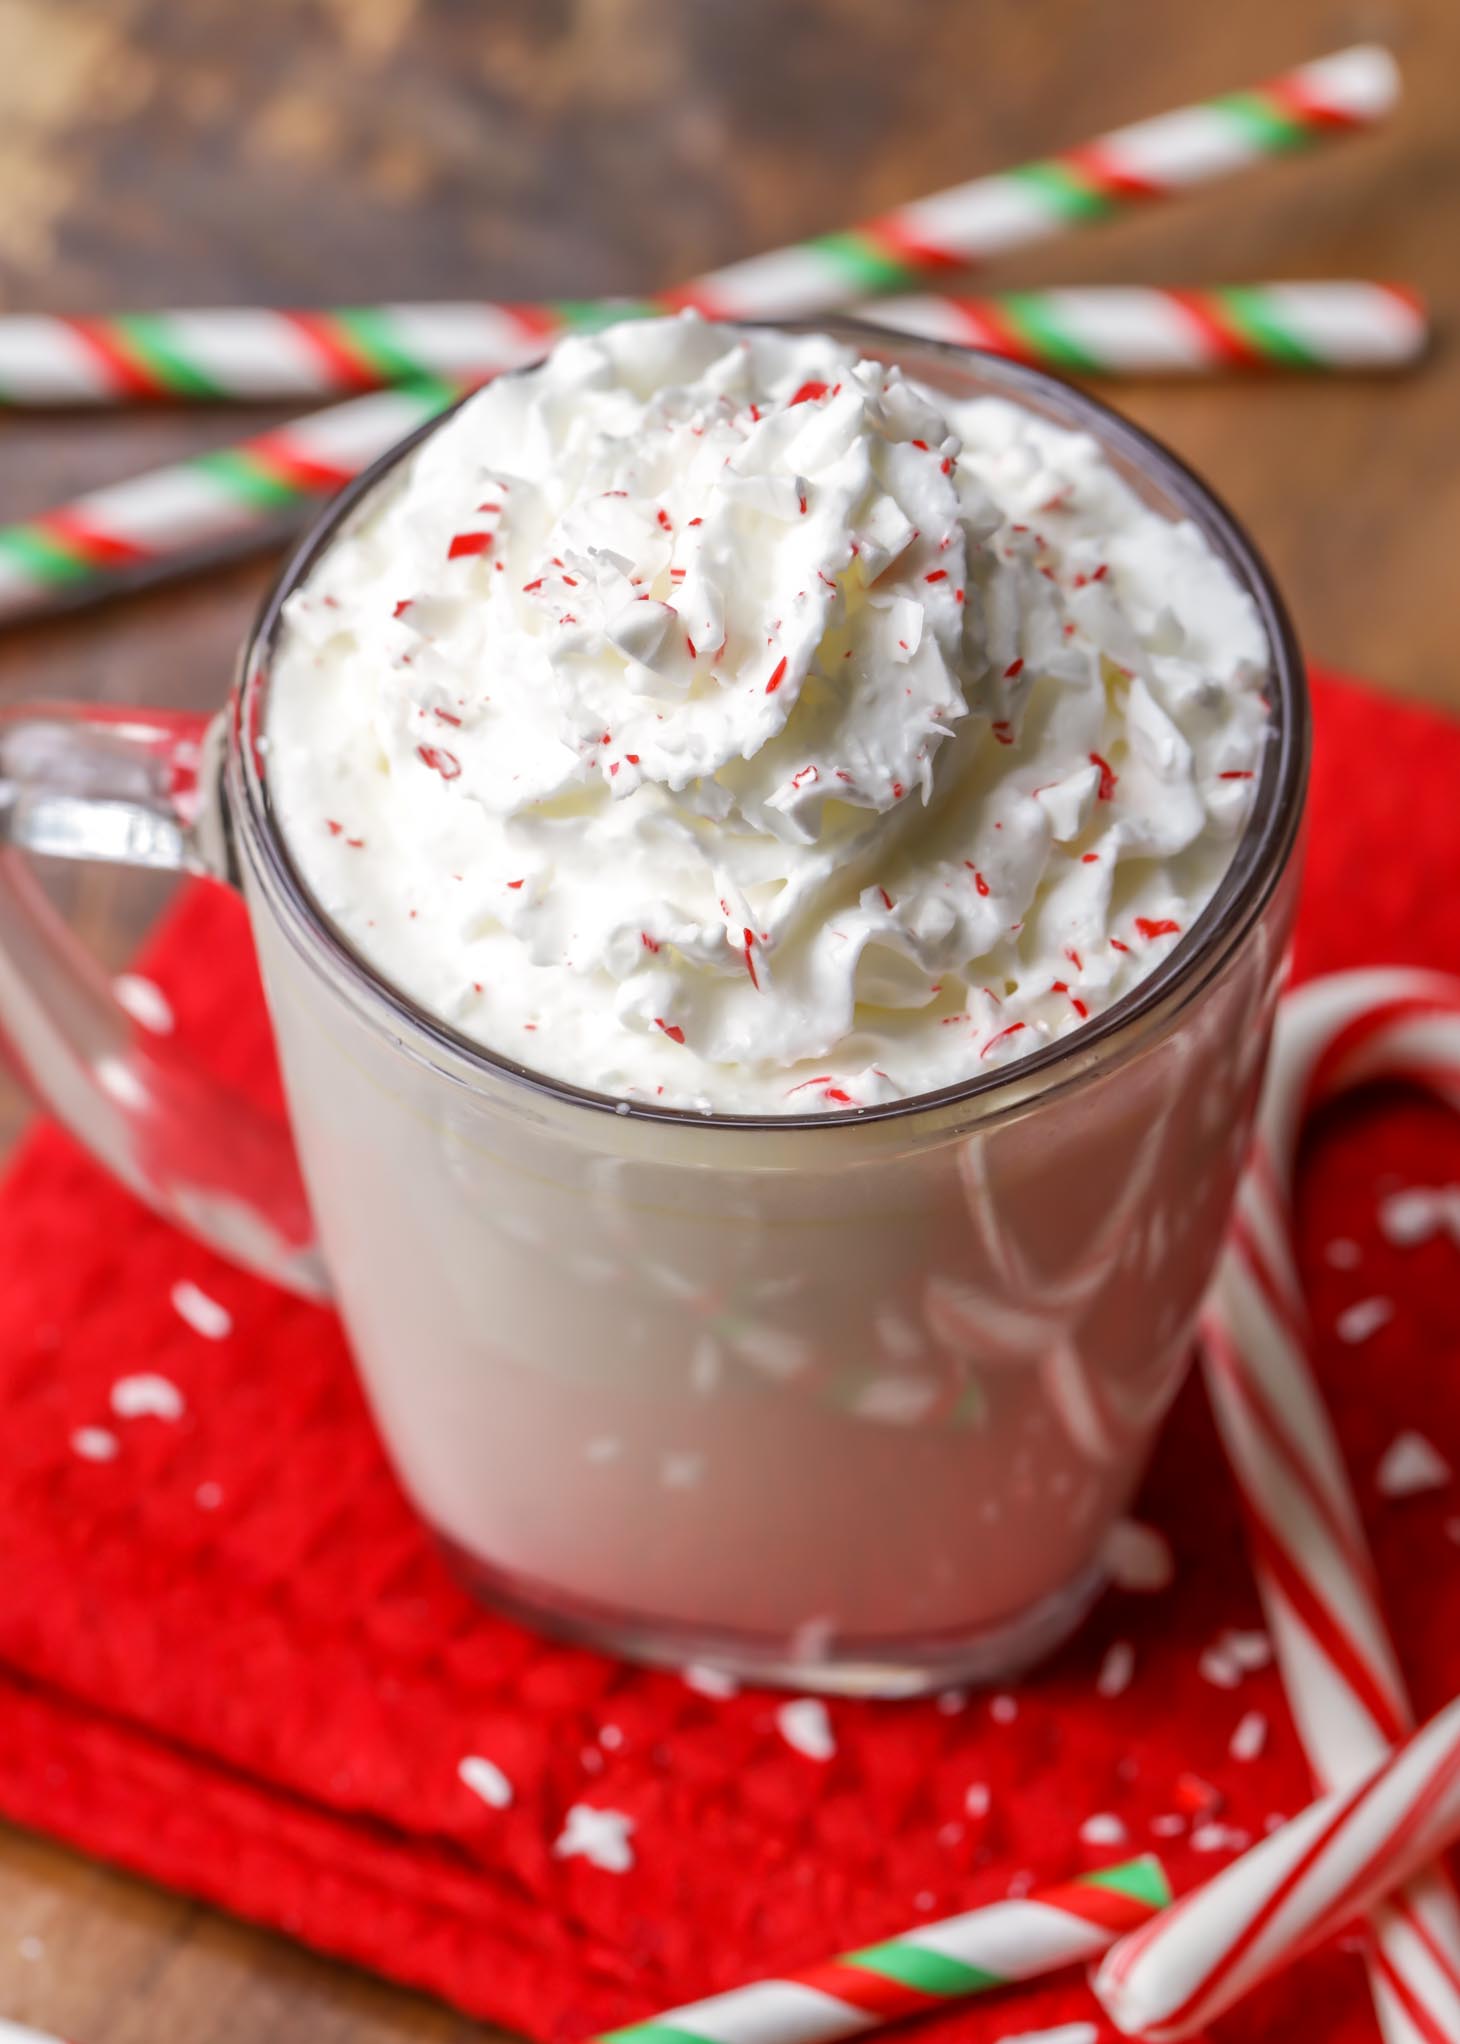 Our Friday Five-Lil Luna White Chocolate Peppermint Hot Chocolate